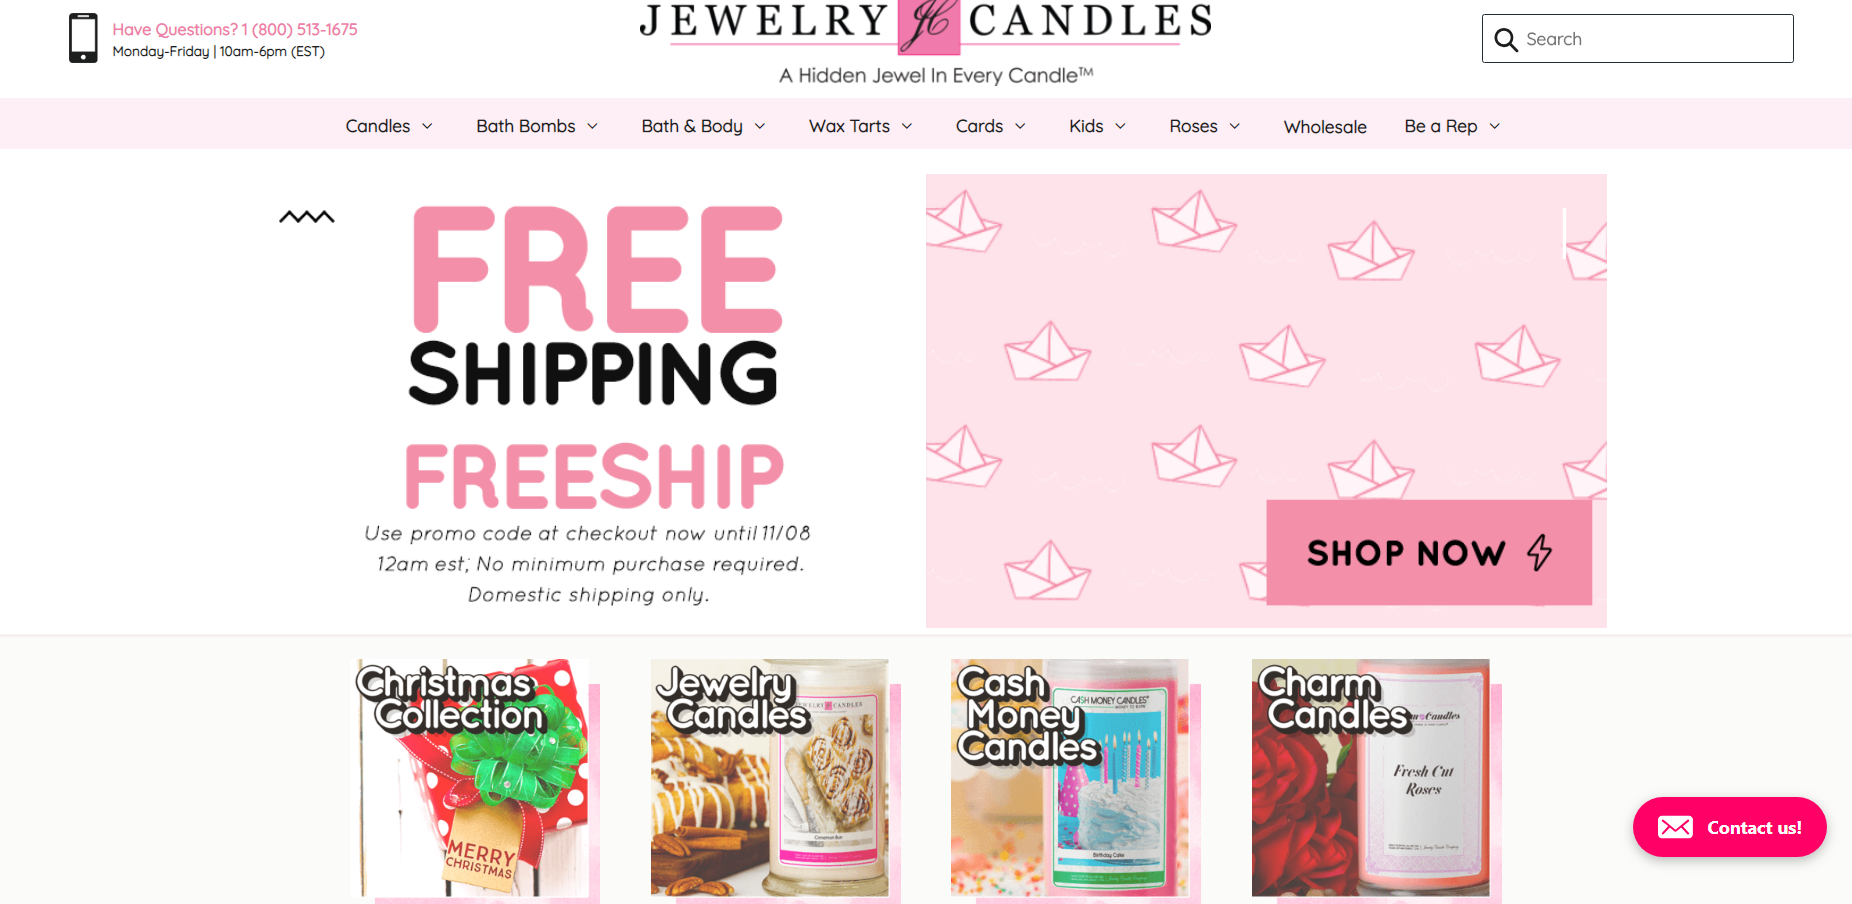 Jewelry Candles Coupons